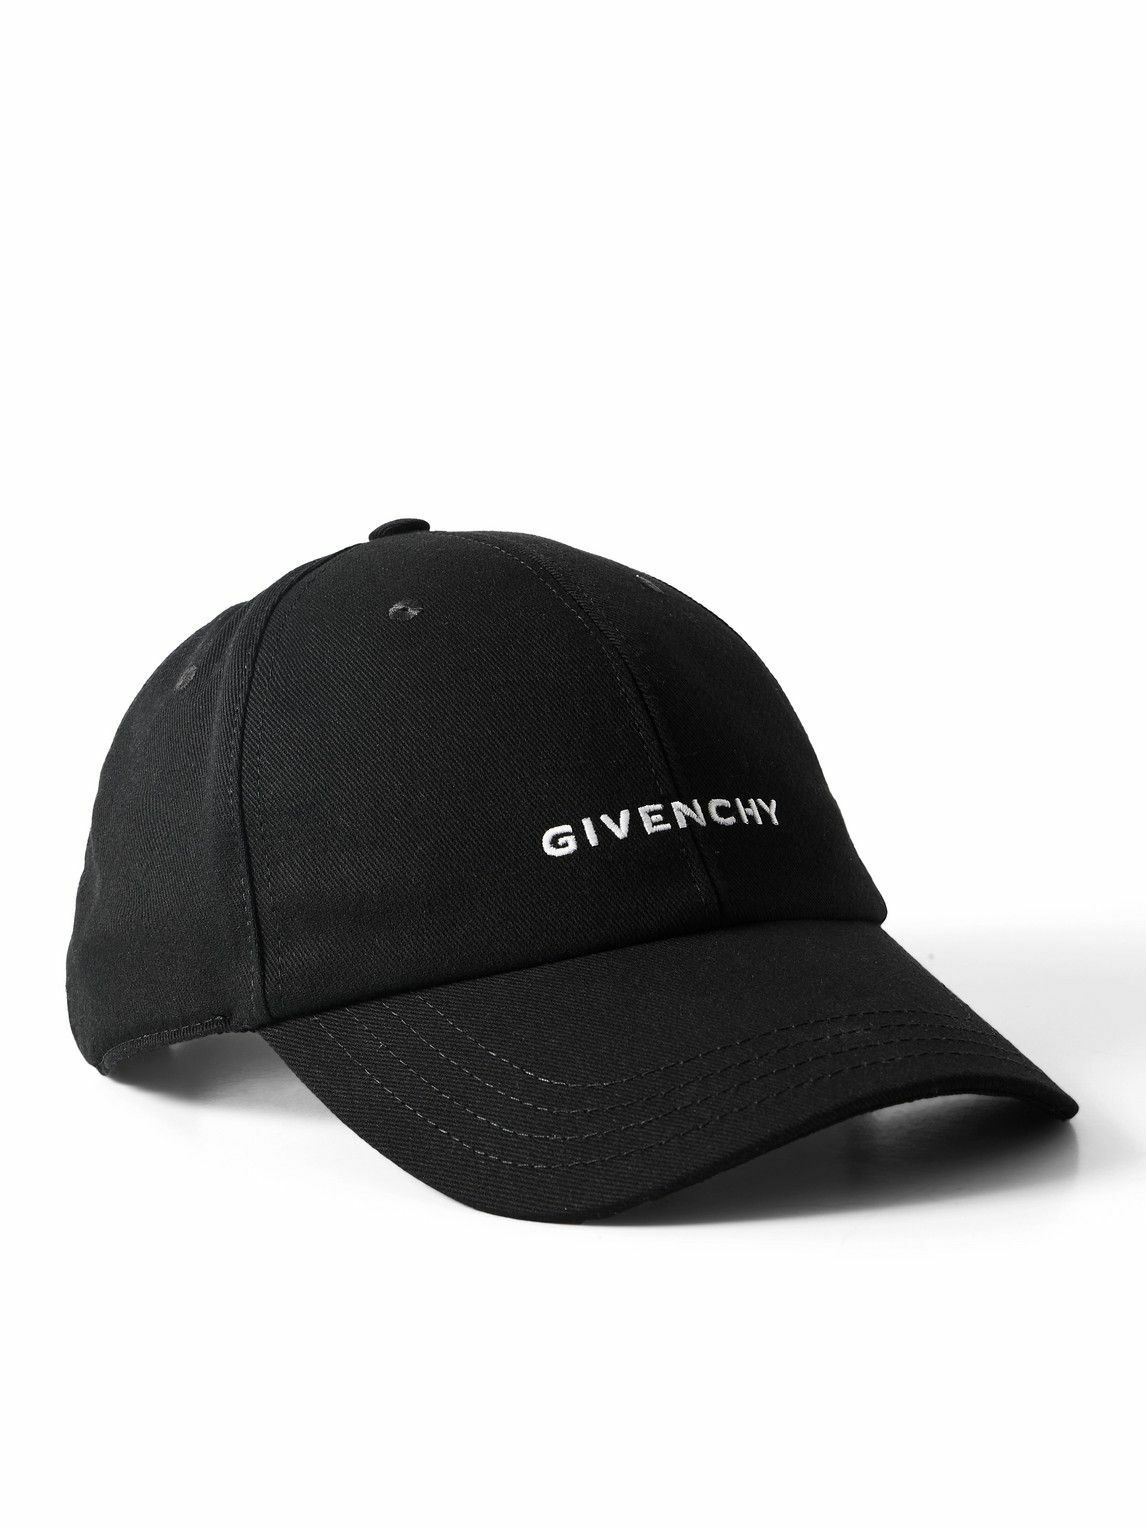 Givenchy - Logo-Embroidered Cotton-Blend Twill Baseball Cap Givenchy